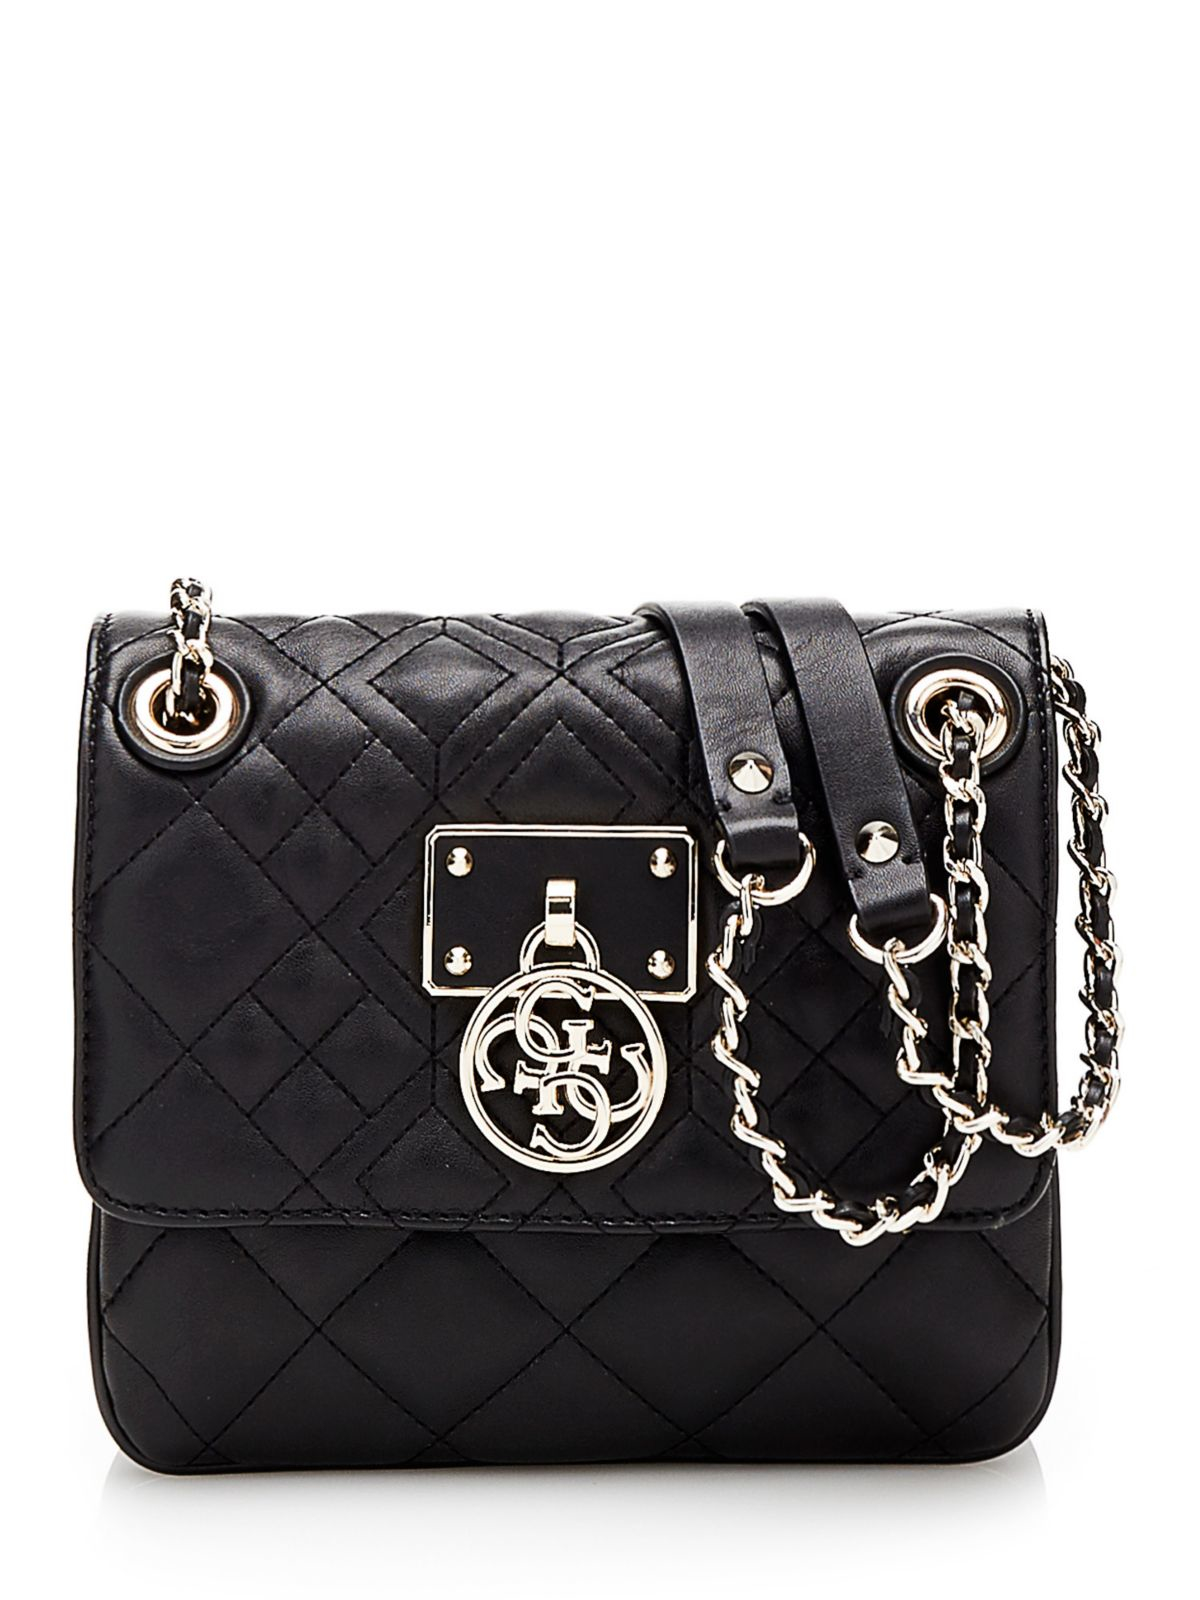 Guess Aliza Quilted Convertible Crossbody Bag in Black (black multi) | Lyst